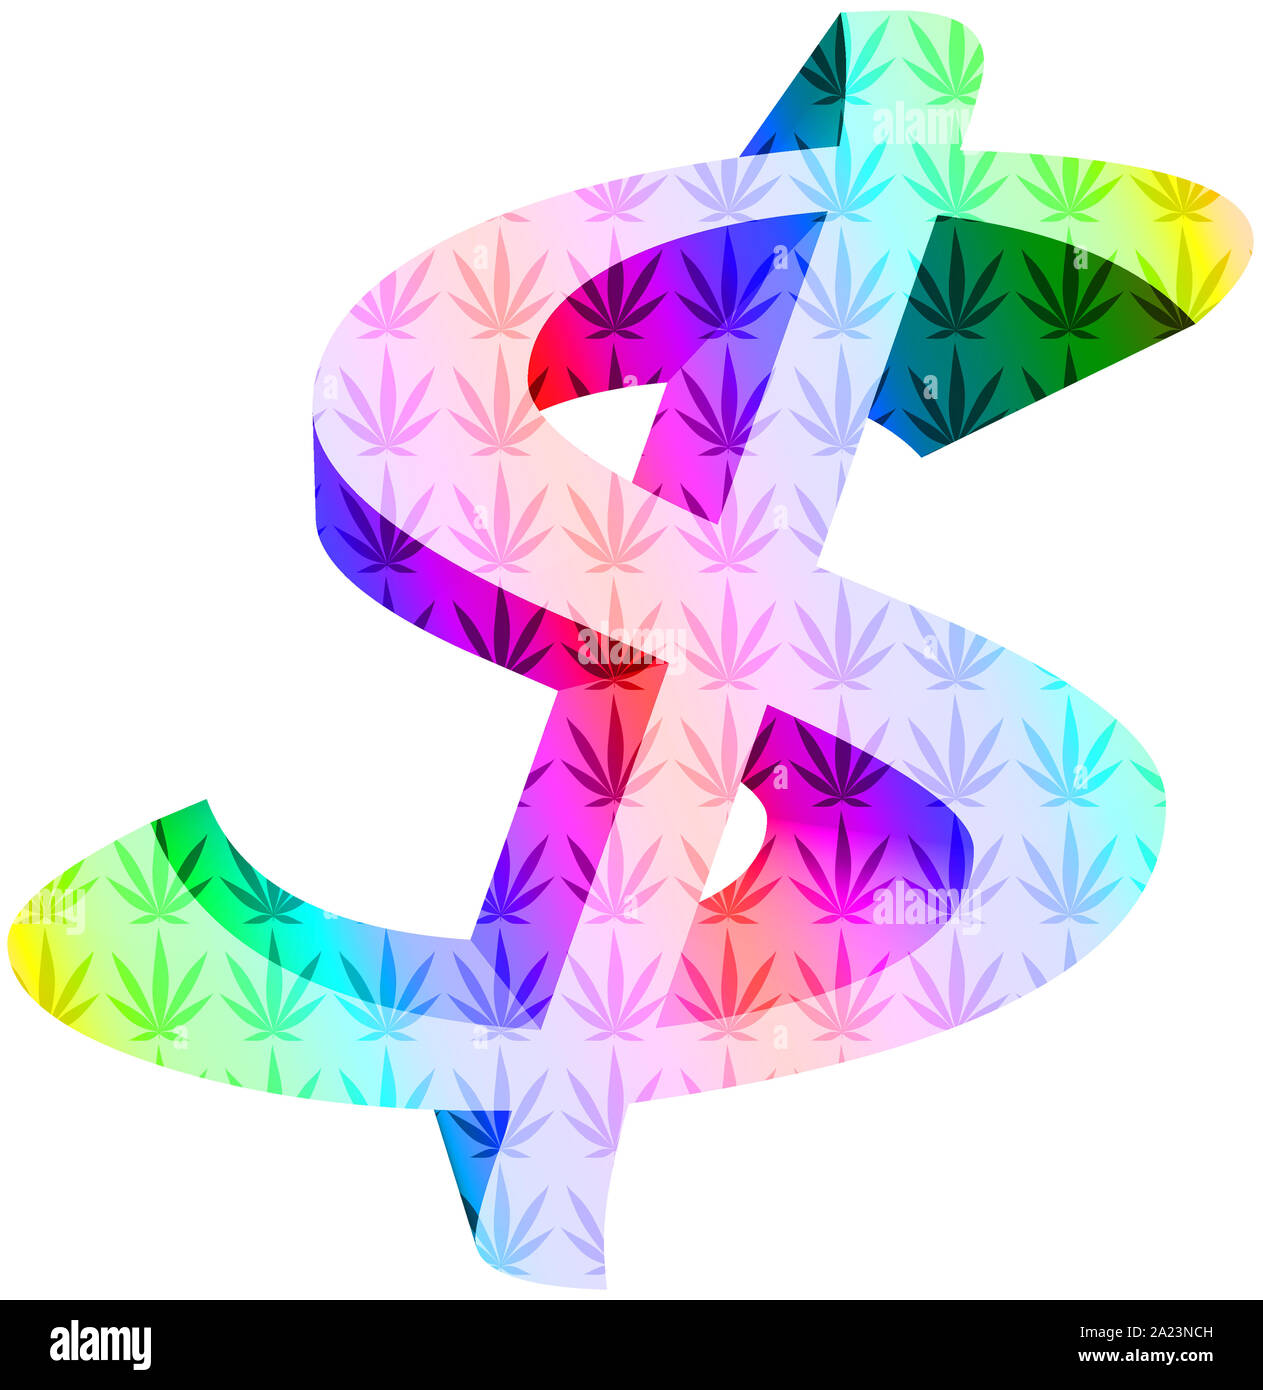 A colorful 3d dollar sign with pot leaves. Stock Photo